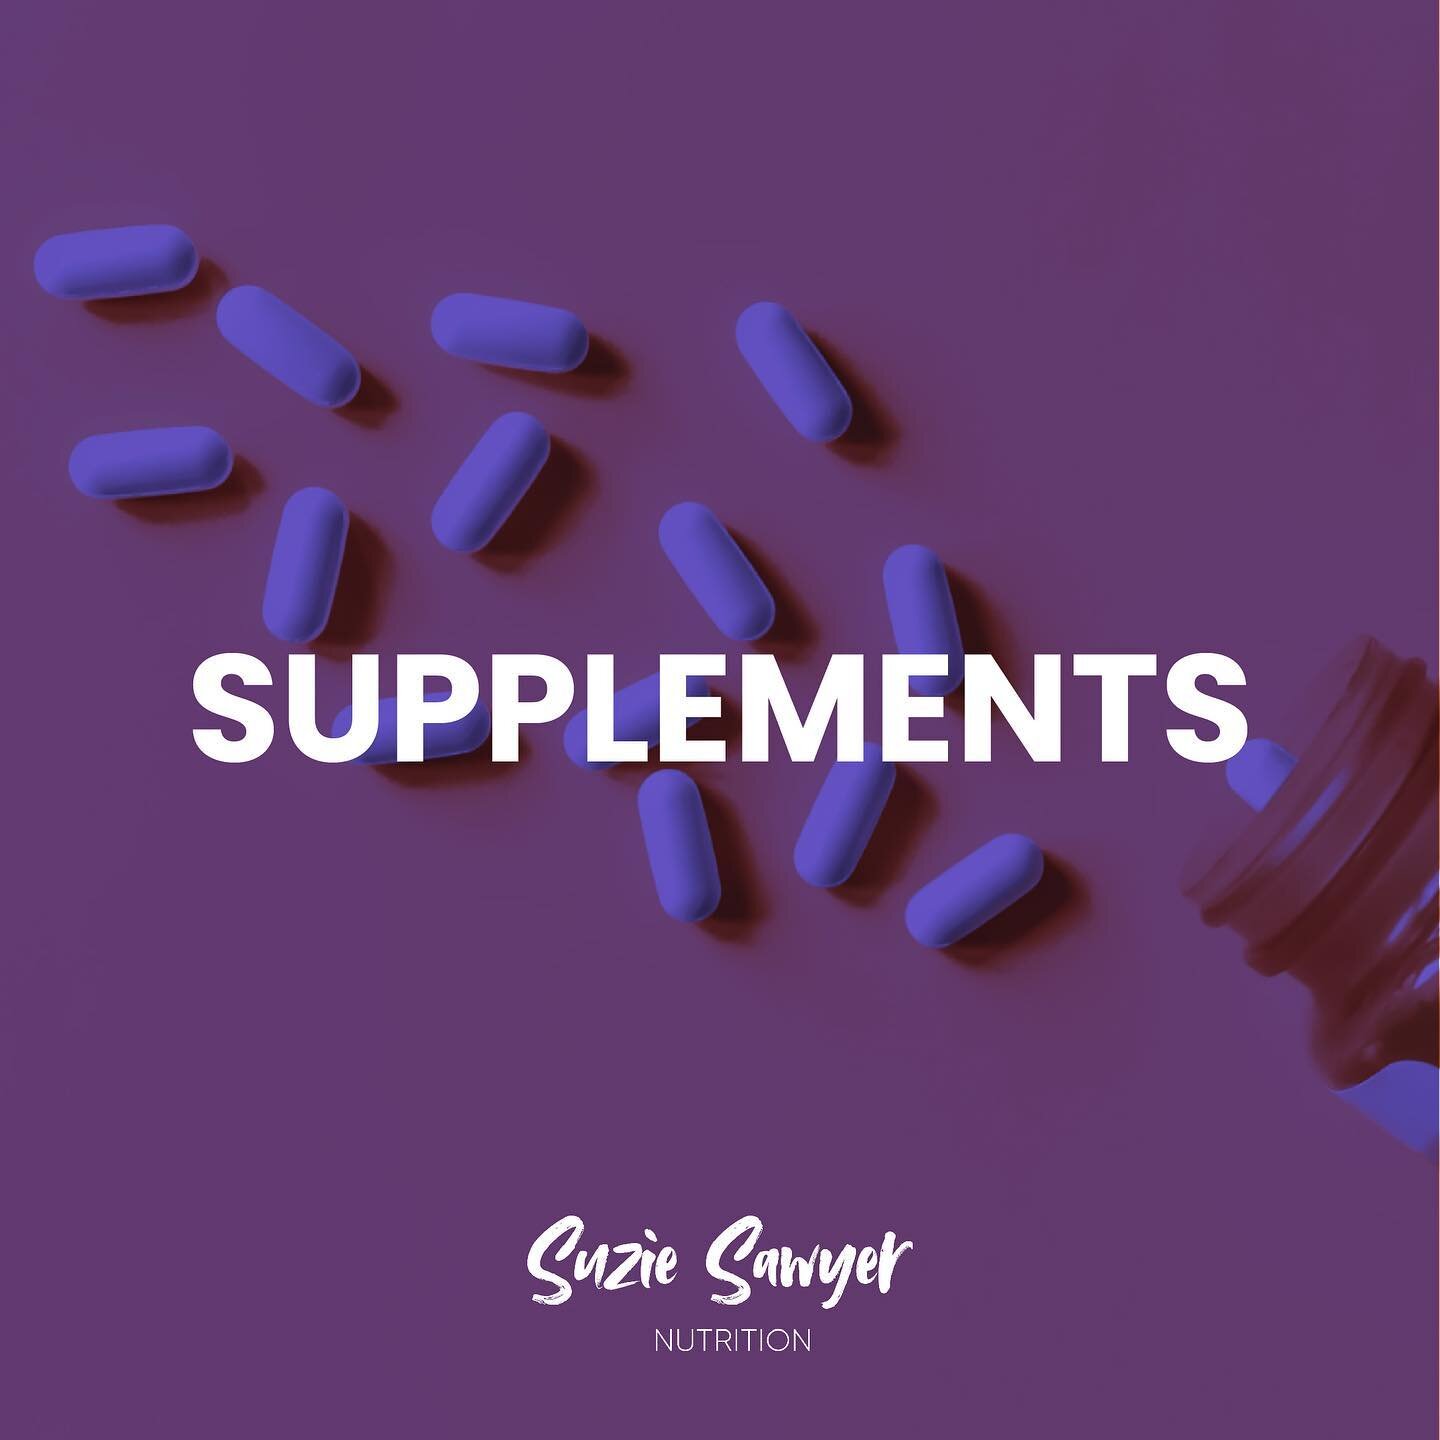 As well as nutrition help I can assist with supplements. I&rsquo;ve been fortunate to work inside the food supplement industry alongside some of the worlds most respected manufacturers and I&rsquo;ve built up the kind of expertise that enables me to 